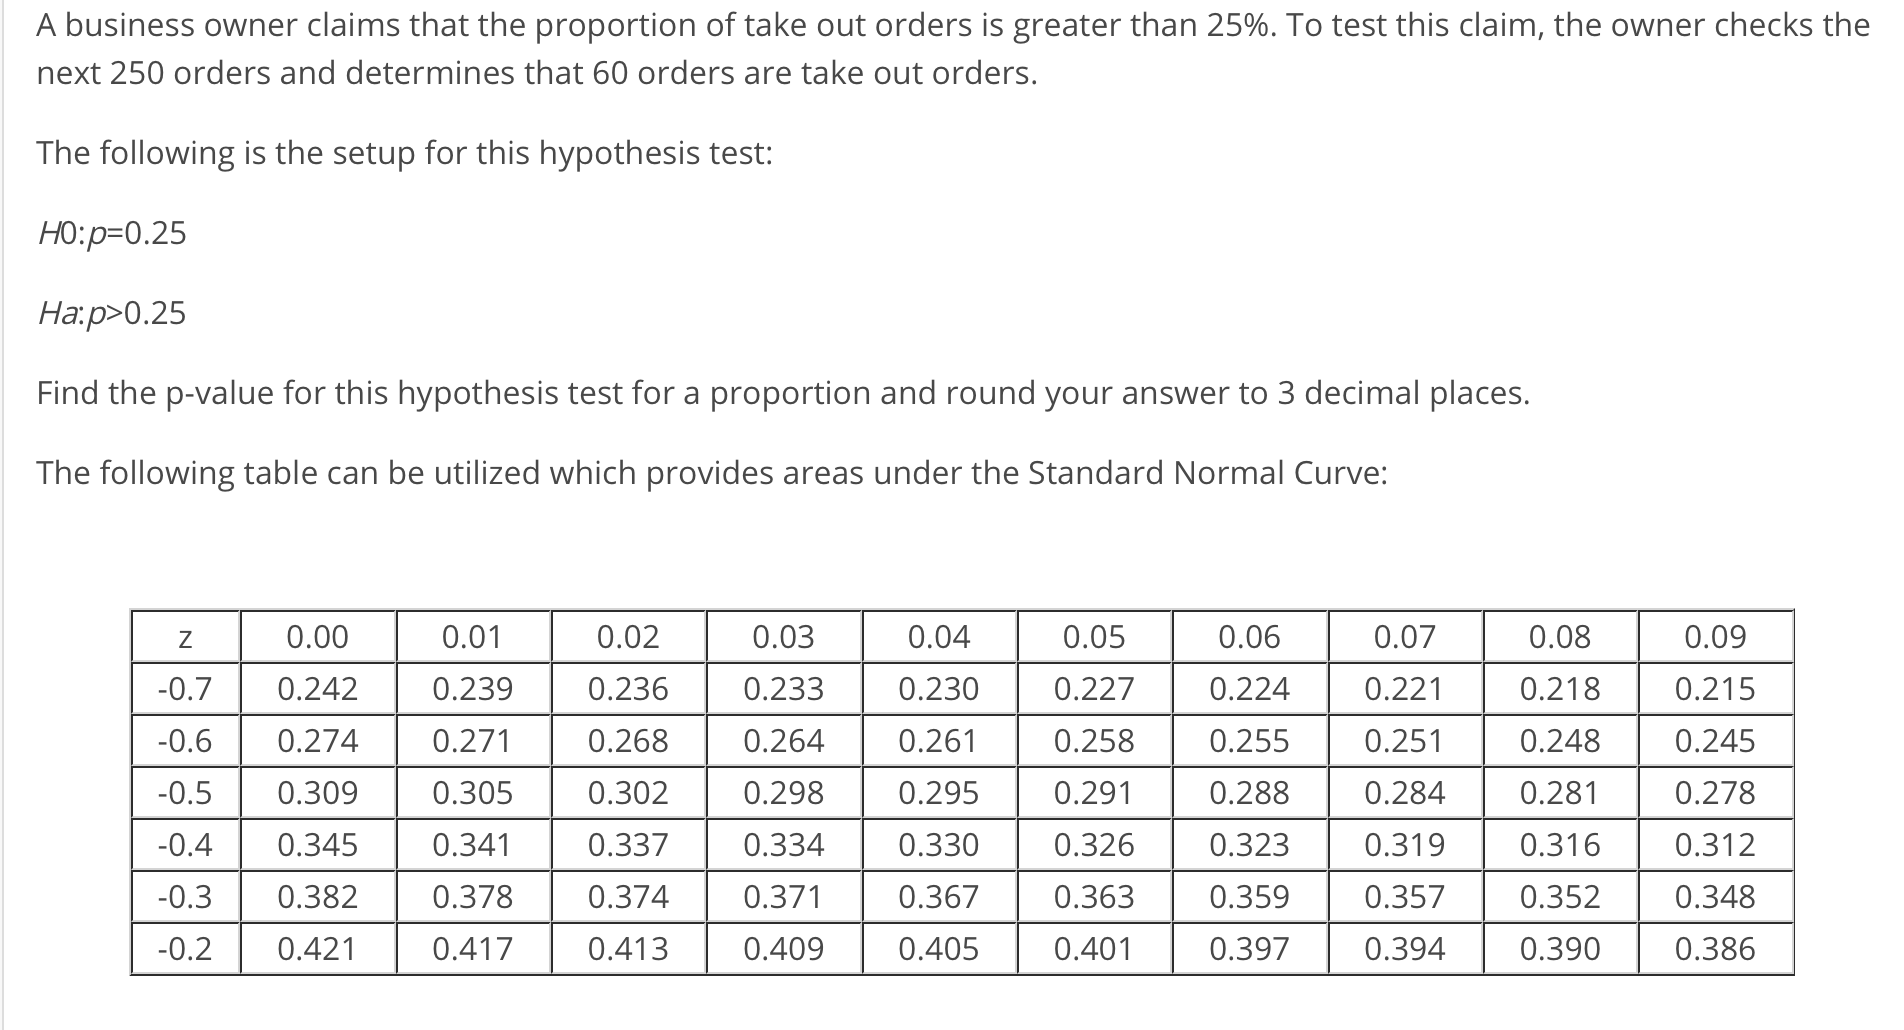 A business owner claims that the proportion of take out orders is greater than 25%. To test this claim, the owner checks the
next 250 orders and determines that 60 orders are take out orders.
The following is the setup for this hypothesis test:
Ha:p>0.25
Find the p-value for this hypothesis test for a proportion and round your answer to 3 decimal places.
The following table can be utilized which provides areas under the Standard Normal Curve:
0.00
0.7 0.242
0.60.274
0.5 0.309
0.4 0.345
-0.3 0.382
0.2 0.421
0.01
0.239
0.271
0.305
0.341
0.378
0.417
0.02
0.236
0.268
0.302
0.337
0.374
0.413
0.04
0.230
0.264 0.261
0.295
0.330
0.367
0.405
0.07
0.221
0.251
0.284
0.319
0.357
0.394
0.08
0.218
0.248
0.281
0.316
0.352
0.390
0.09
0.215
0.245
0.278
0.312
0.348
0.386
0.03
0.05
0.227
0.258
0.291
0.326 0.323
0.363
0.401
0.06
0.224
0.255
0.288
0.233
0.298
0.334
0.371
0.409
0.359
0.397
